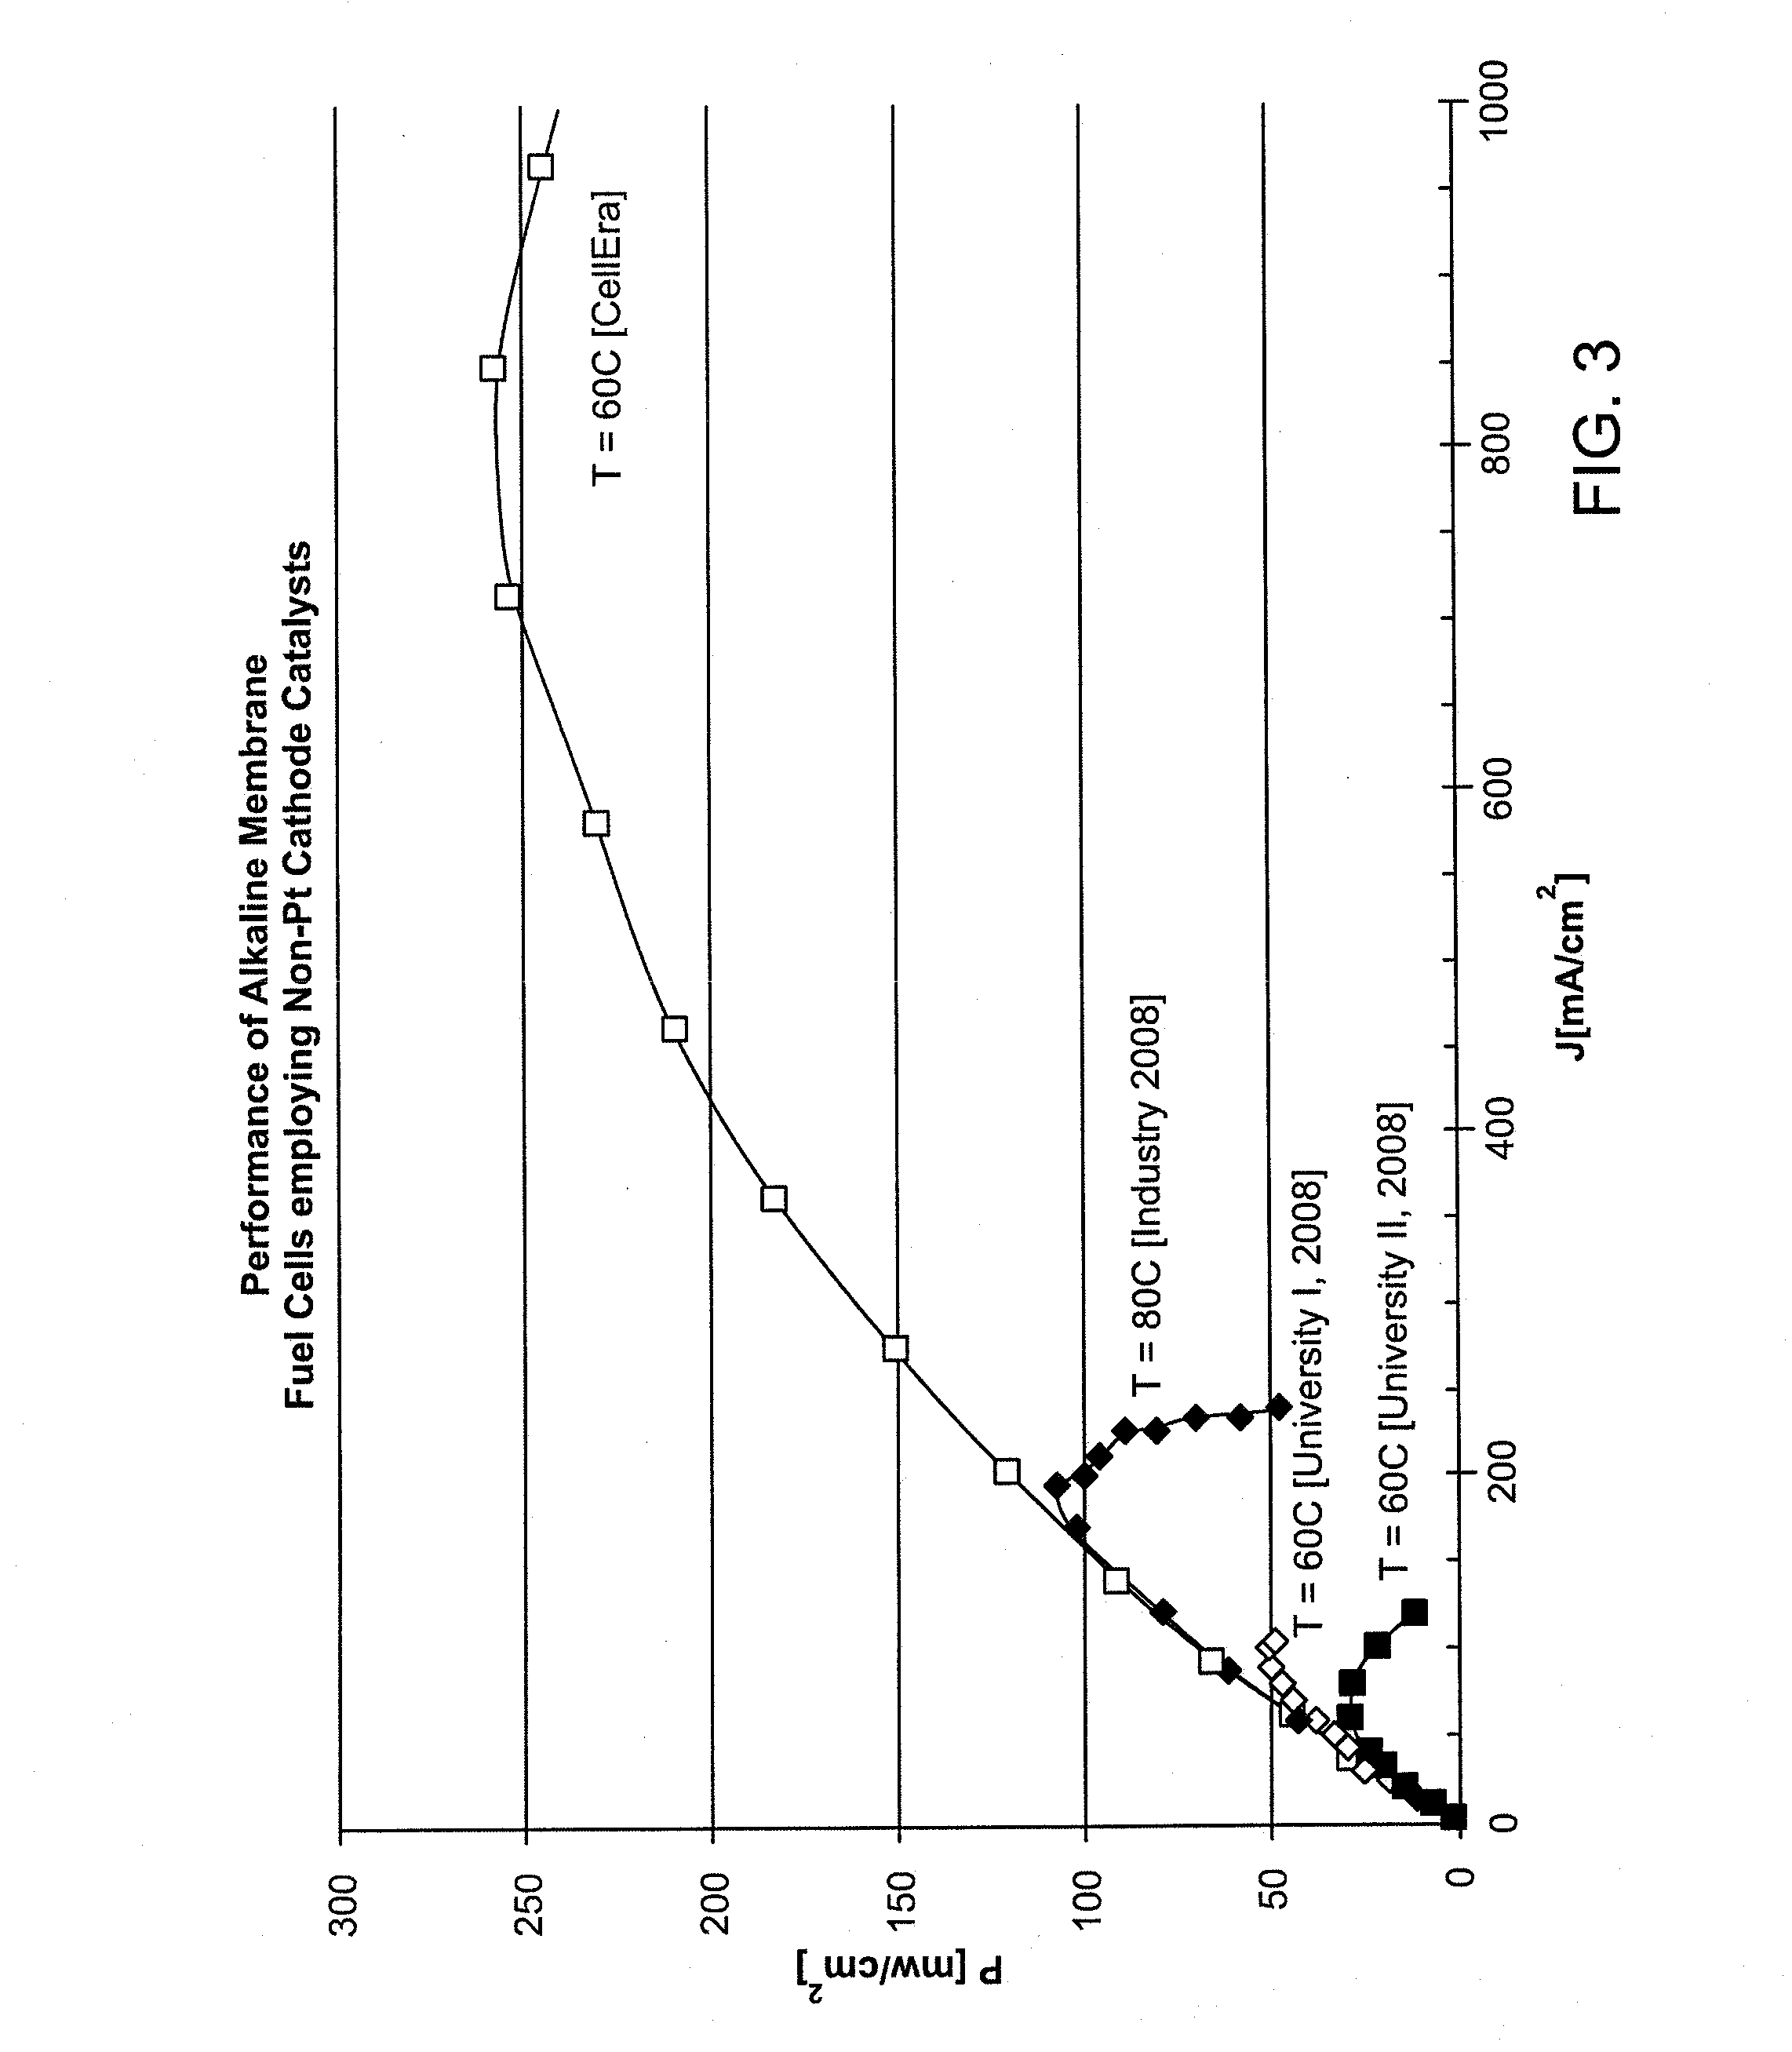 Catalyst Coated Membrane (CCM) and Catalyst Film/Layer for Alkaline Membrane Fuel Cells and Methods of Making Same